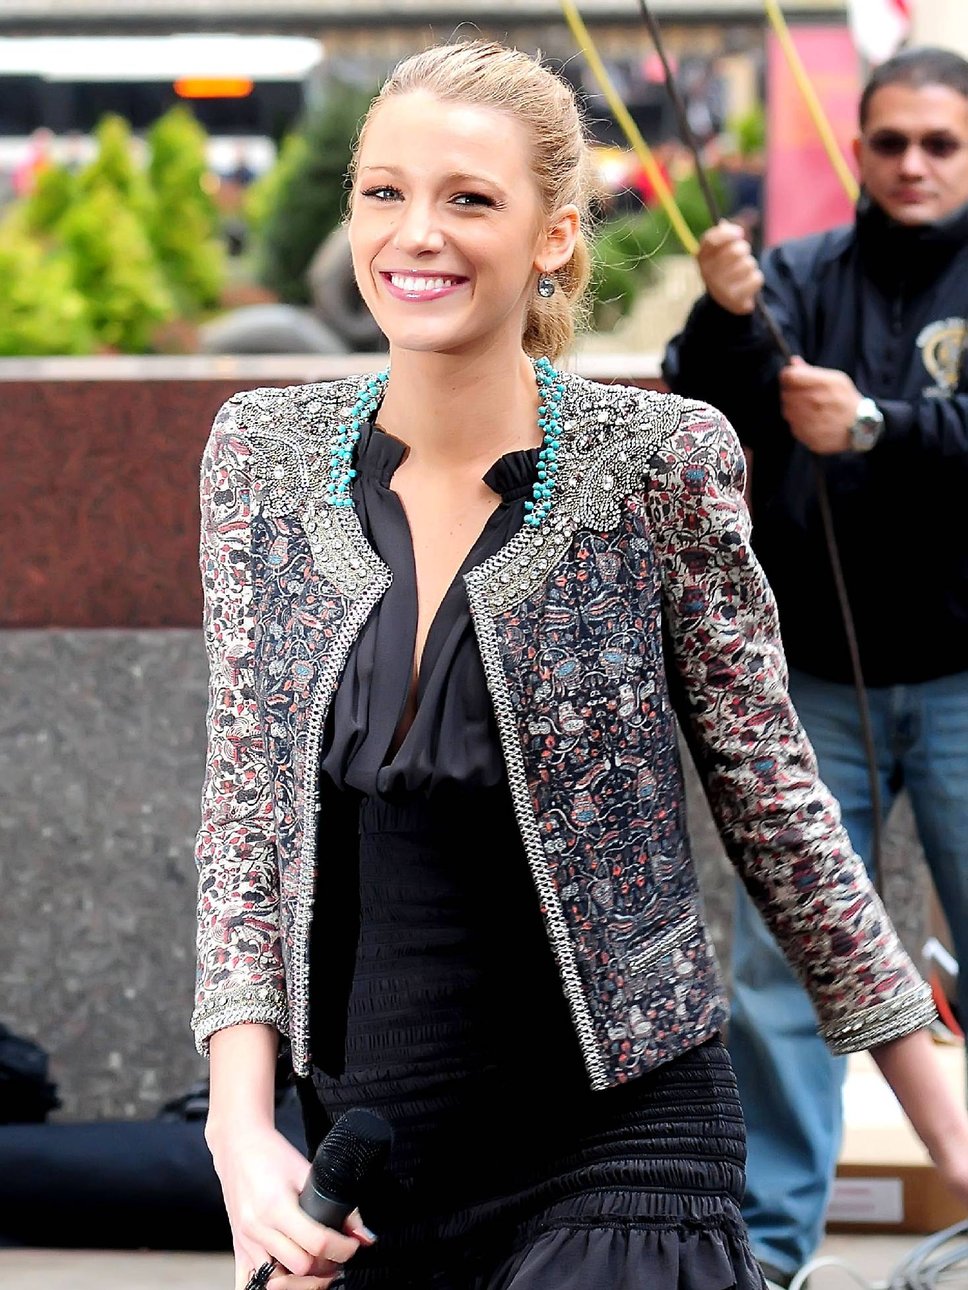 Blake Lively photo 488 of 3157 pics, wallpaper - photo #307200 - ThePlace2